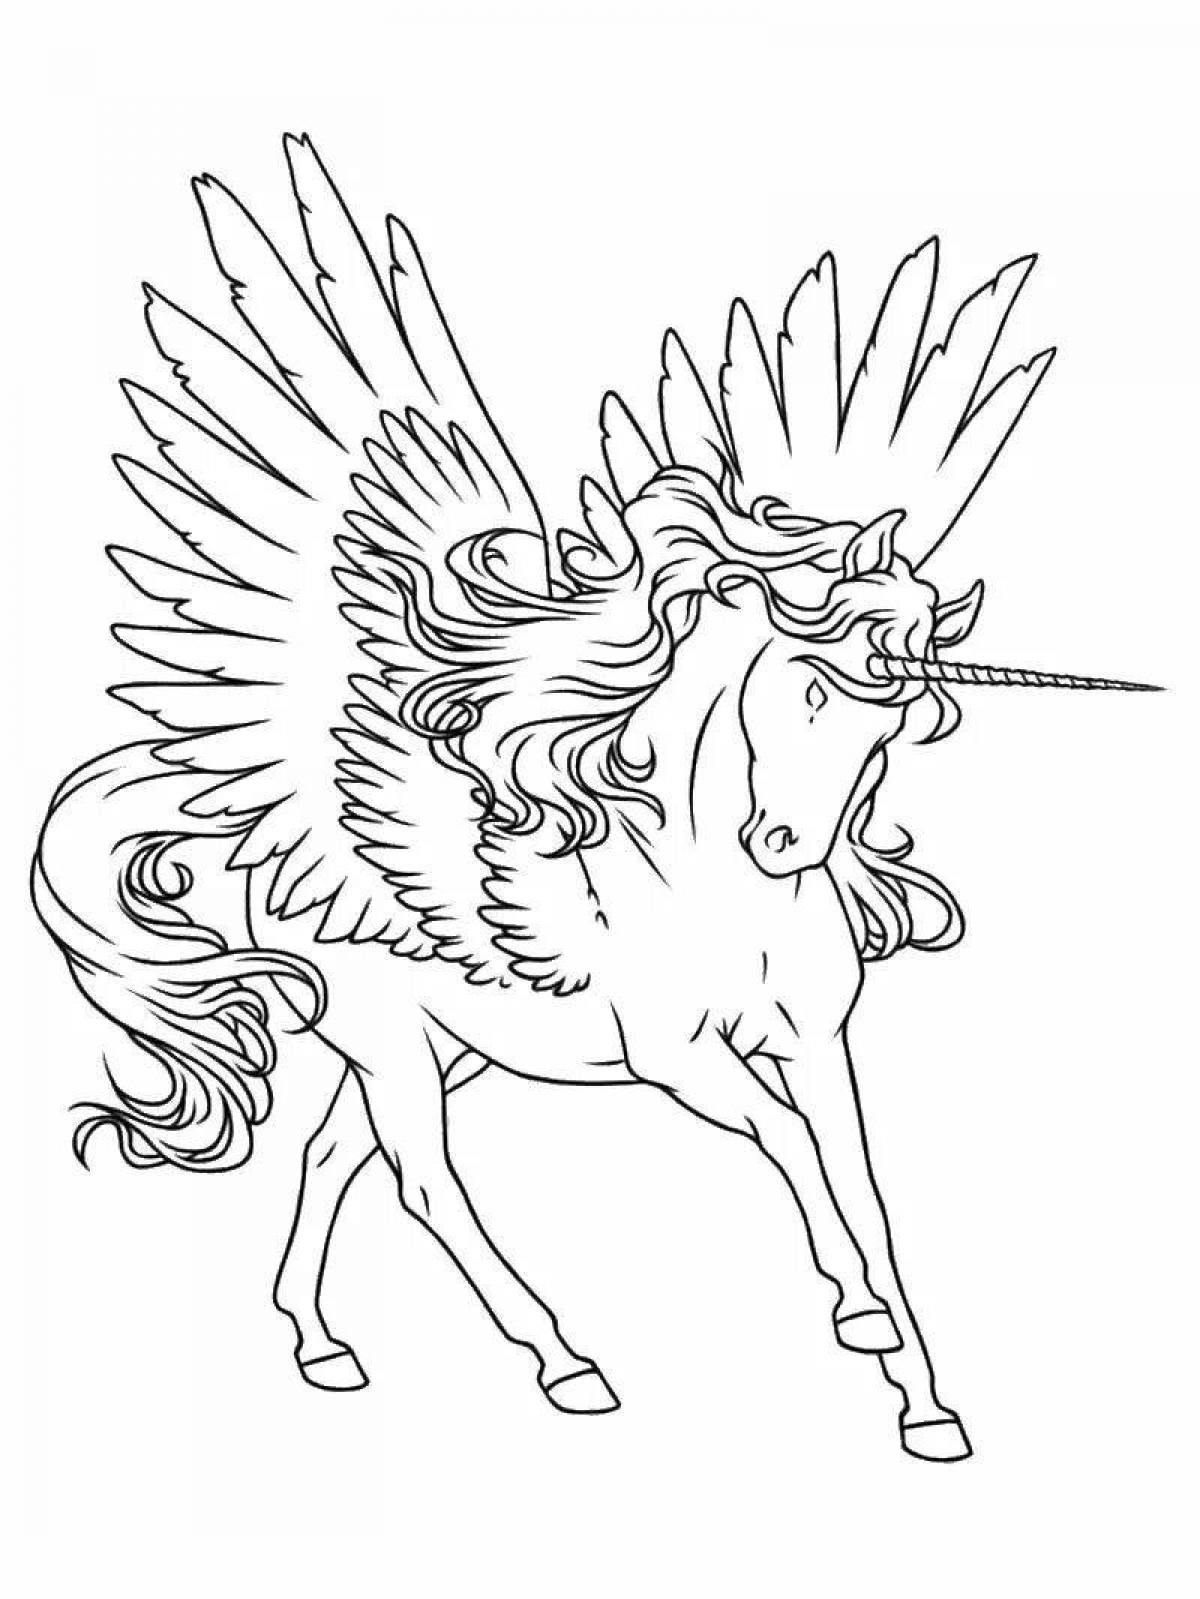 Exotic coloring how to draw a unicorn